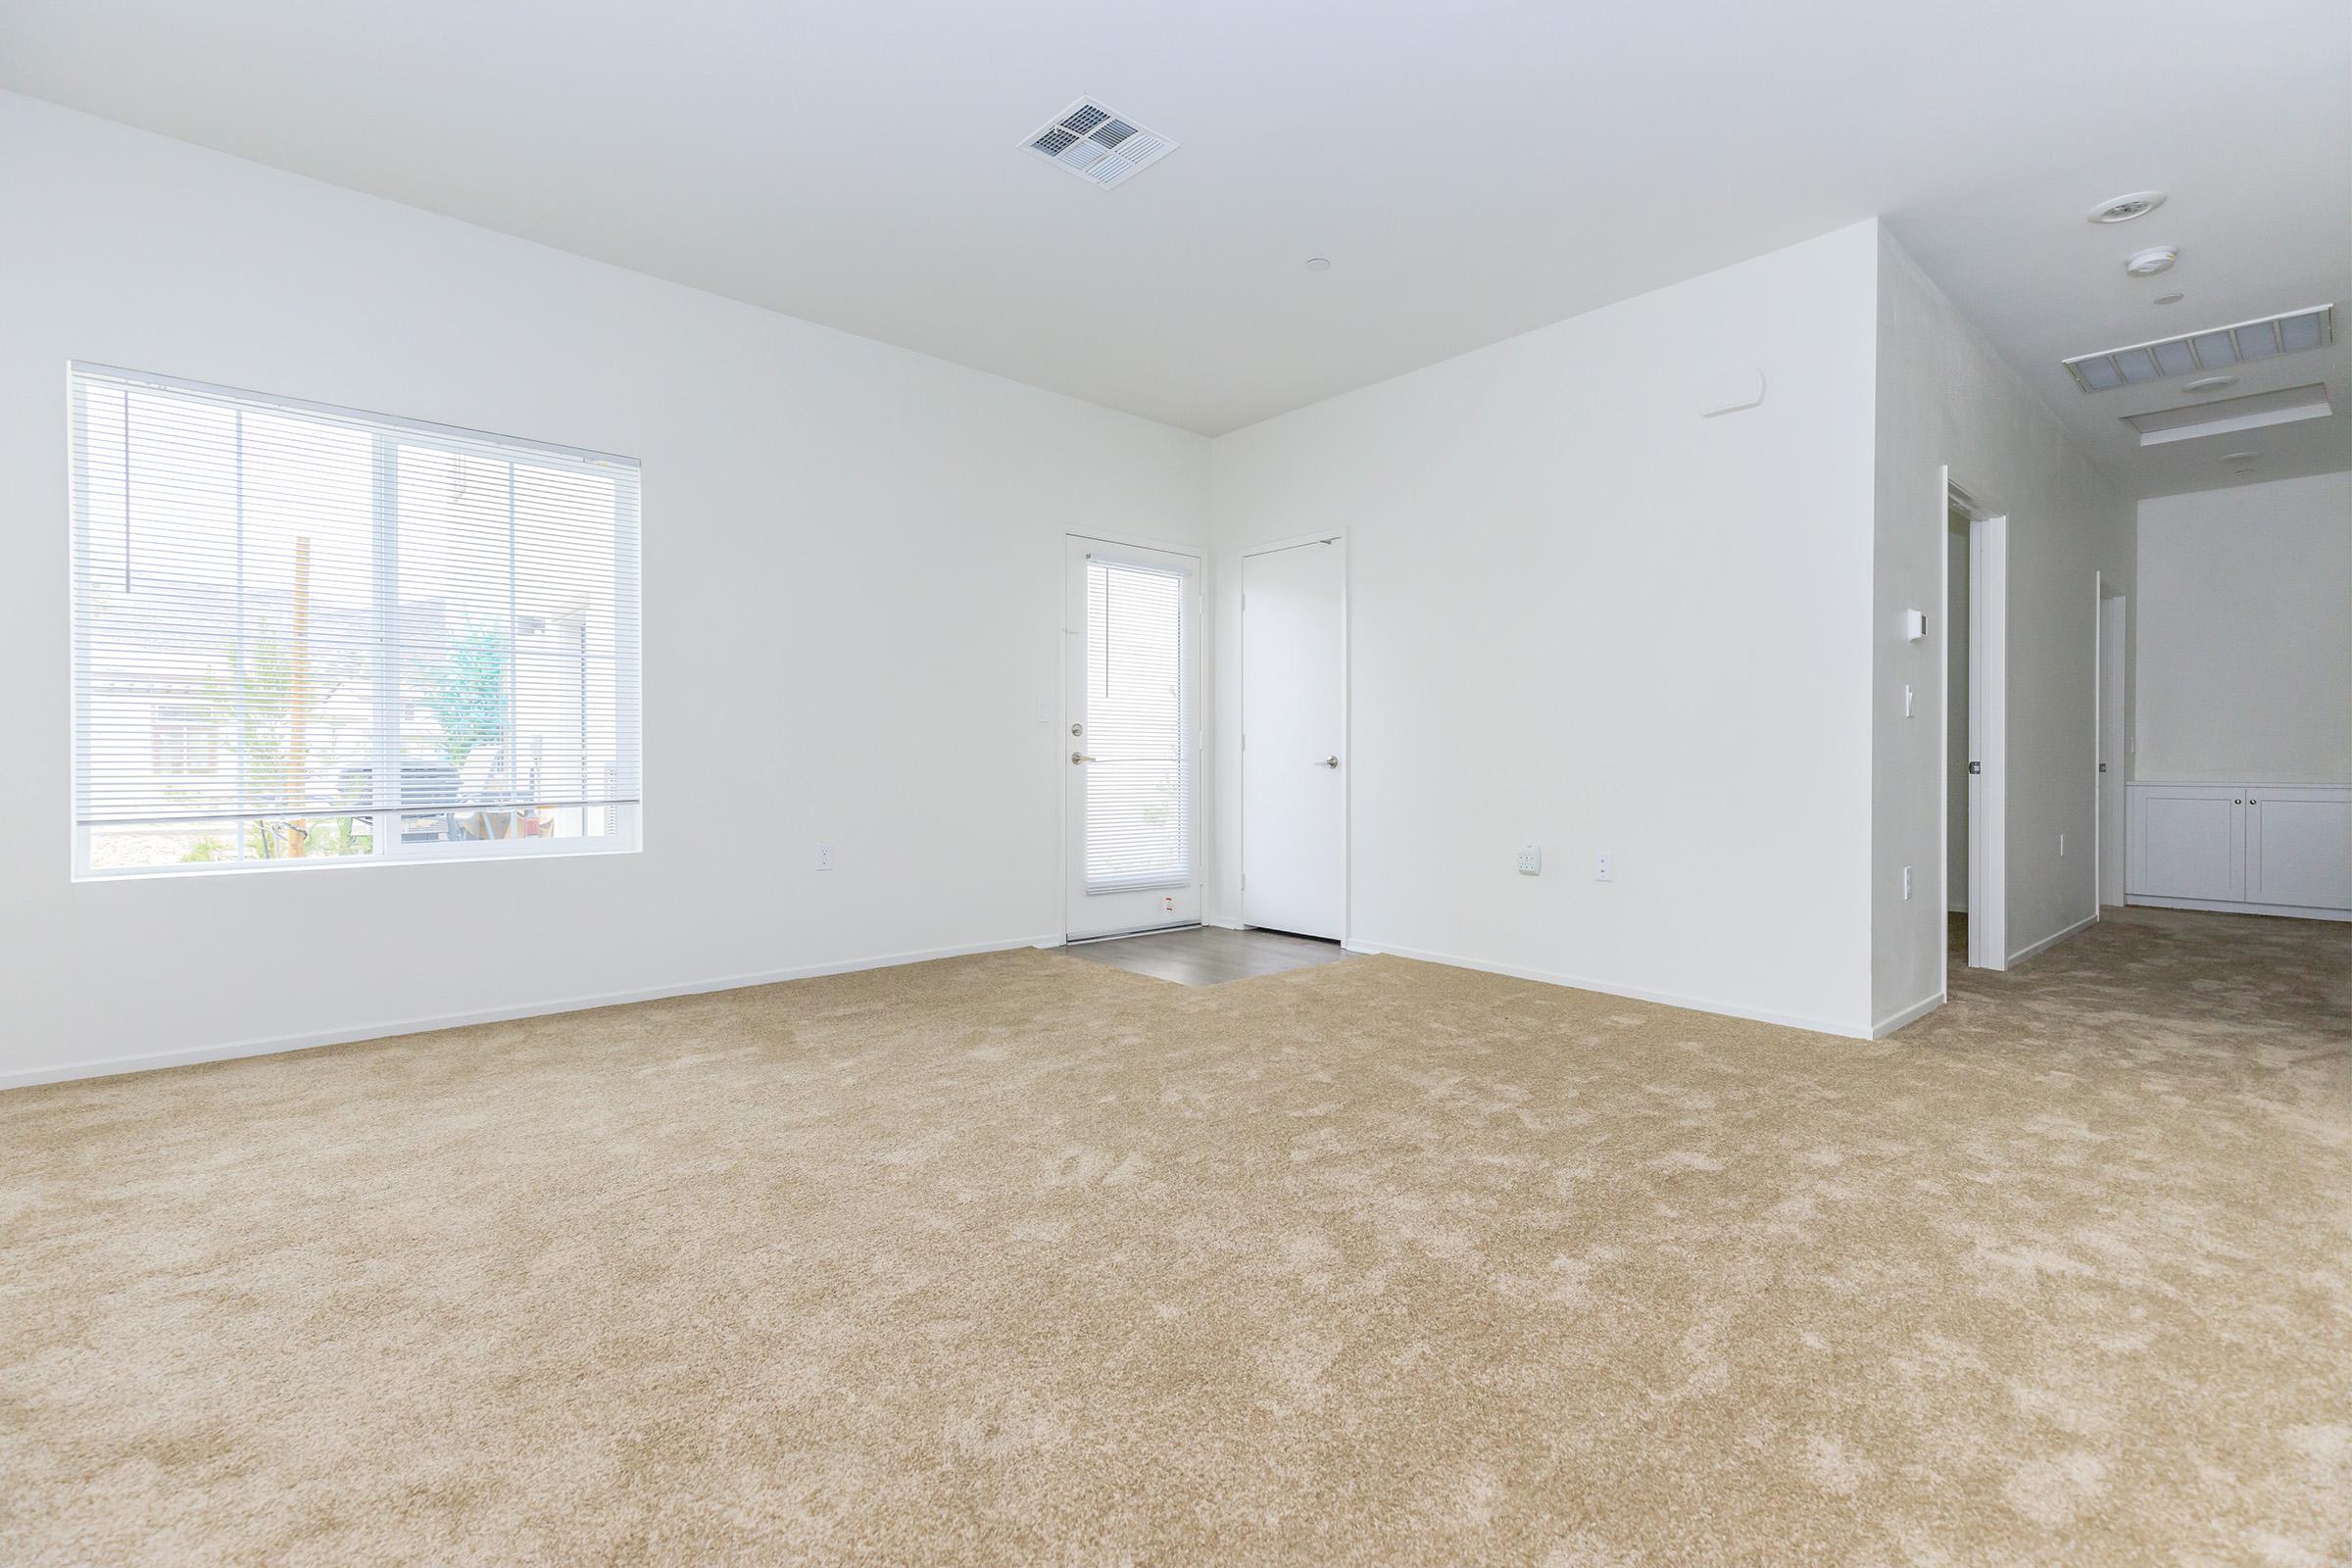 Living room and hallway with carpet